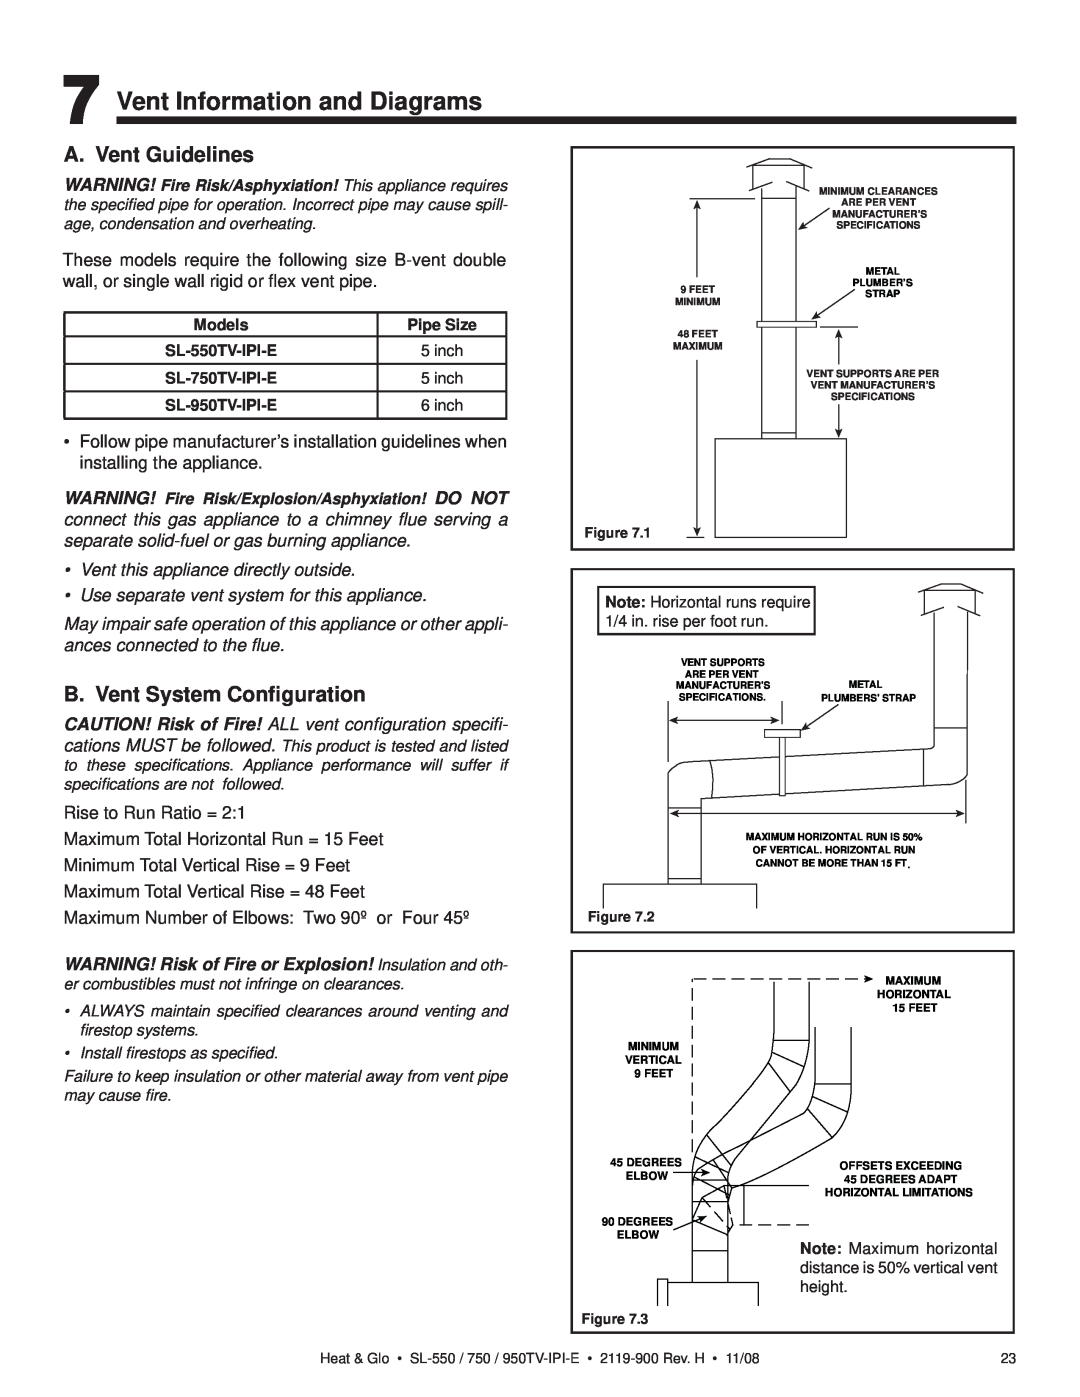 Hearth and Home Technologies SL-950TV-IPI-E Vent Information and Diagrams, A. Vent Guidelines, B. Vent System Conﬁguration 